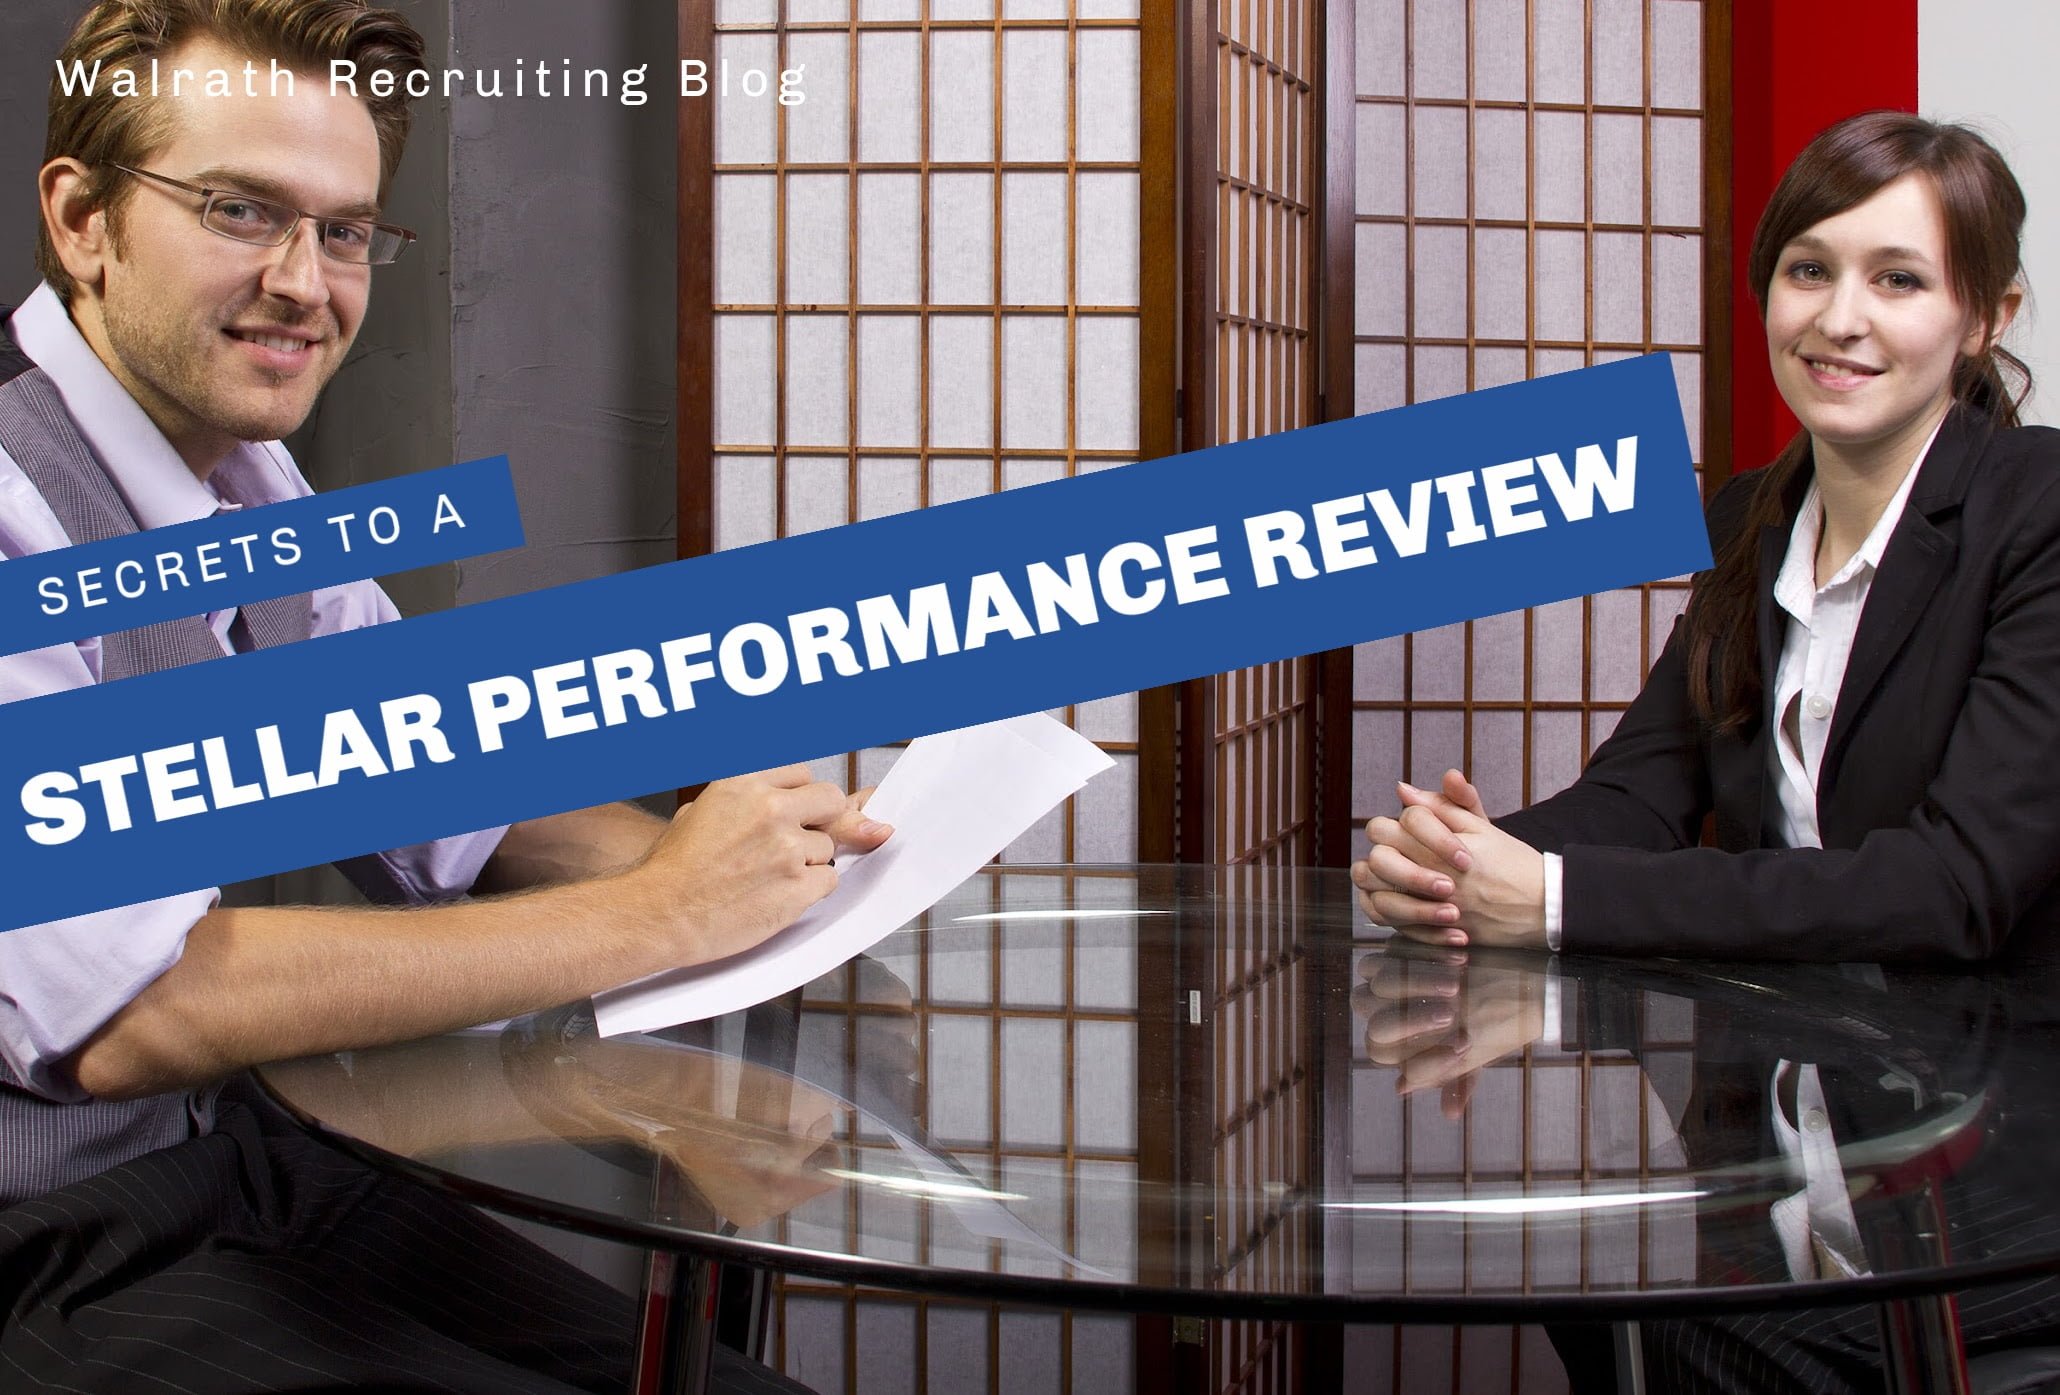 Performance reviews are important, everyone wants to nail it. Check out these tips to help you do so!